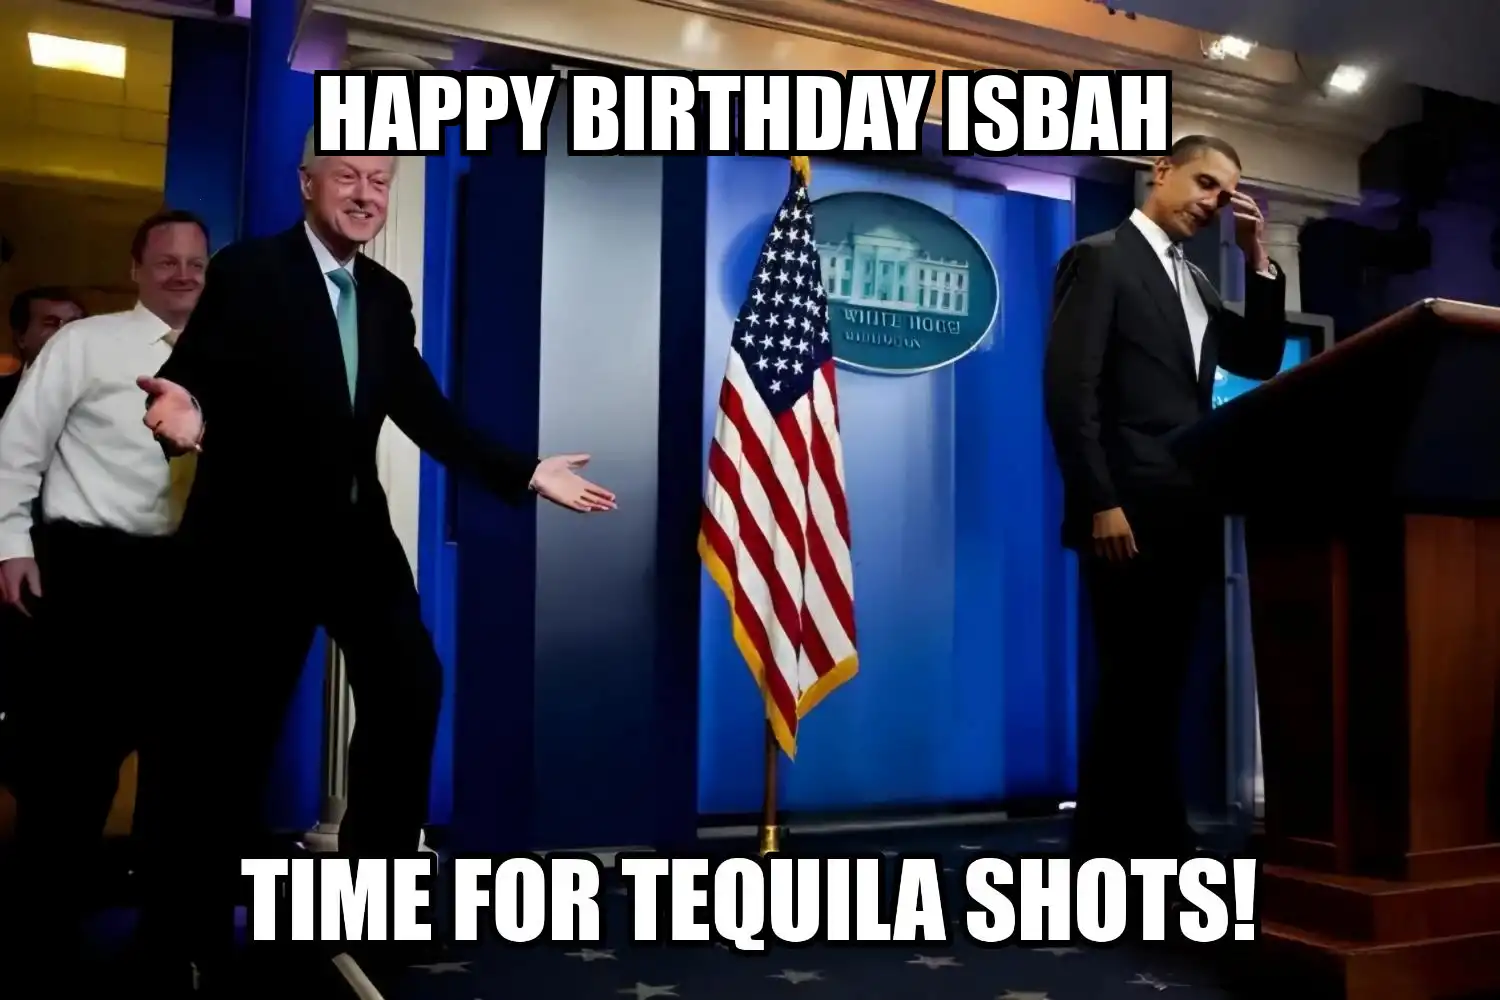 Happy Birthday Isbah Time For Tequila Shots Memes